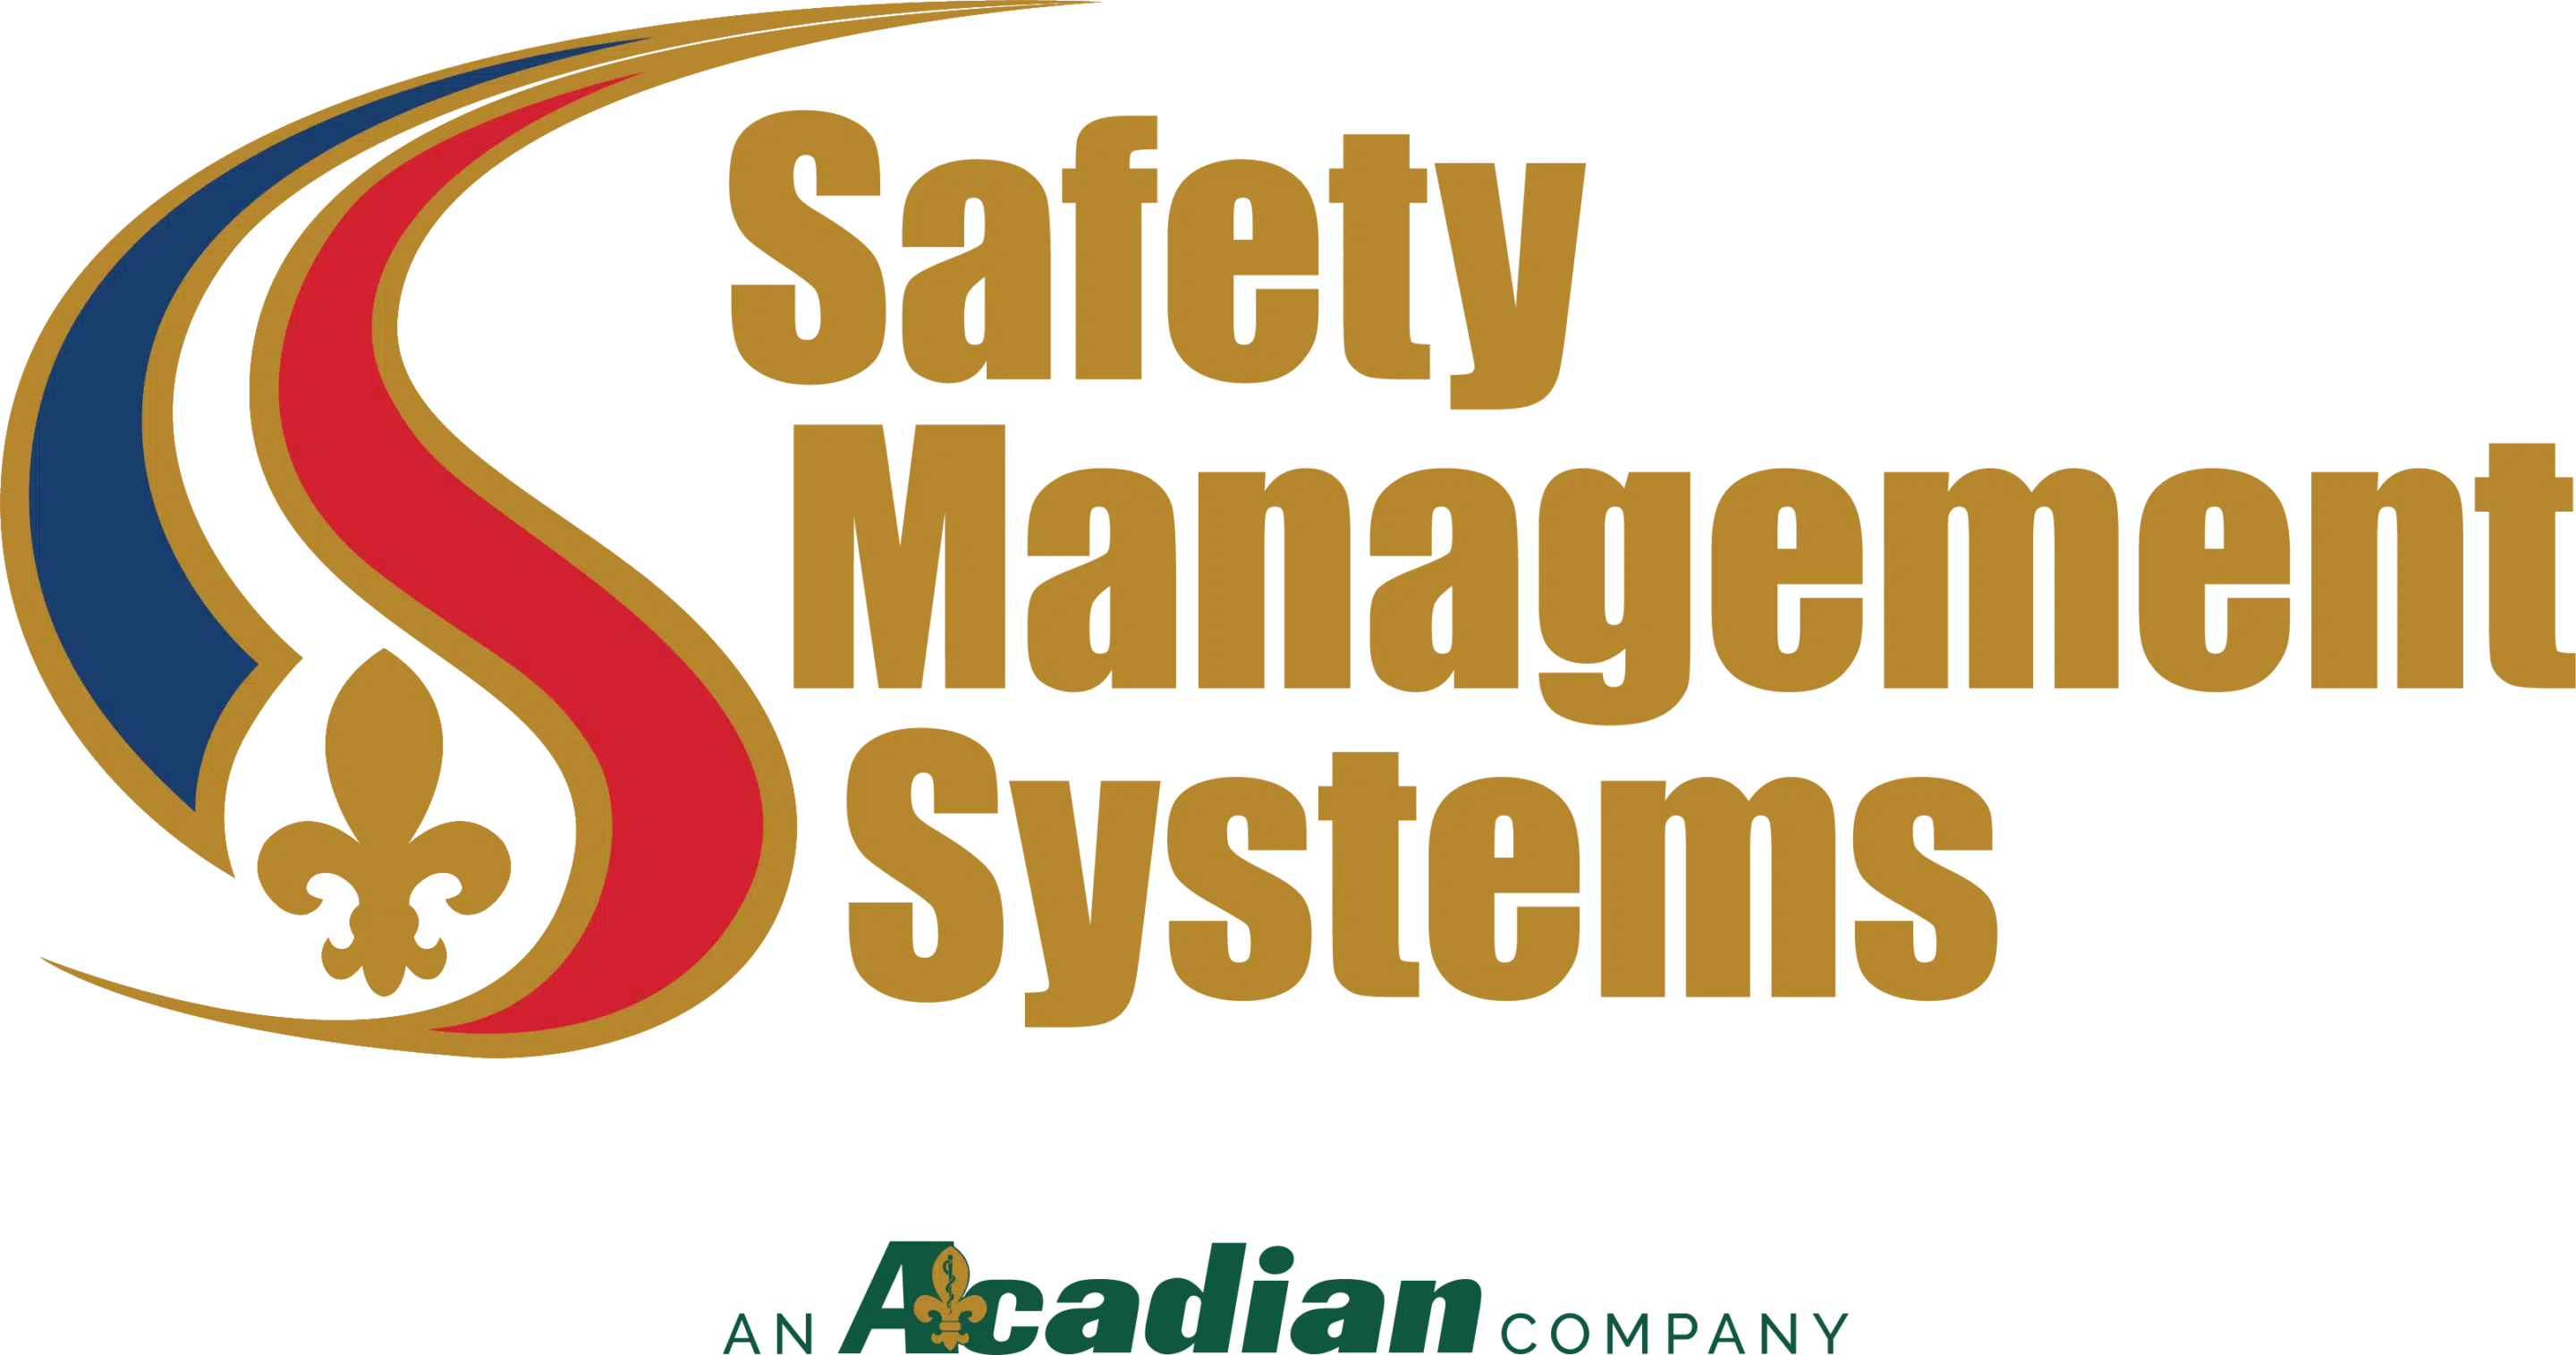 Safety Management Systems, An Acadian Company Logo